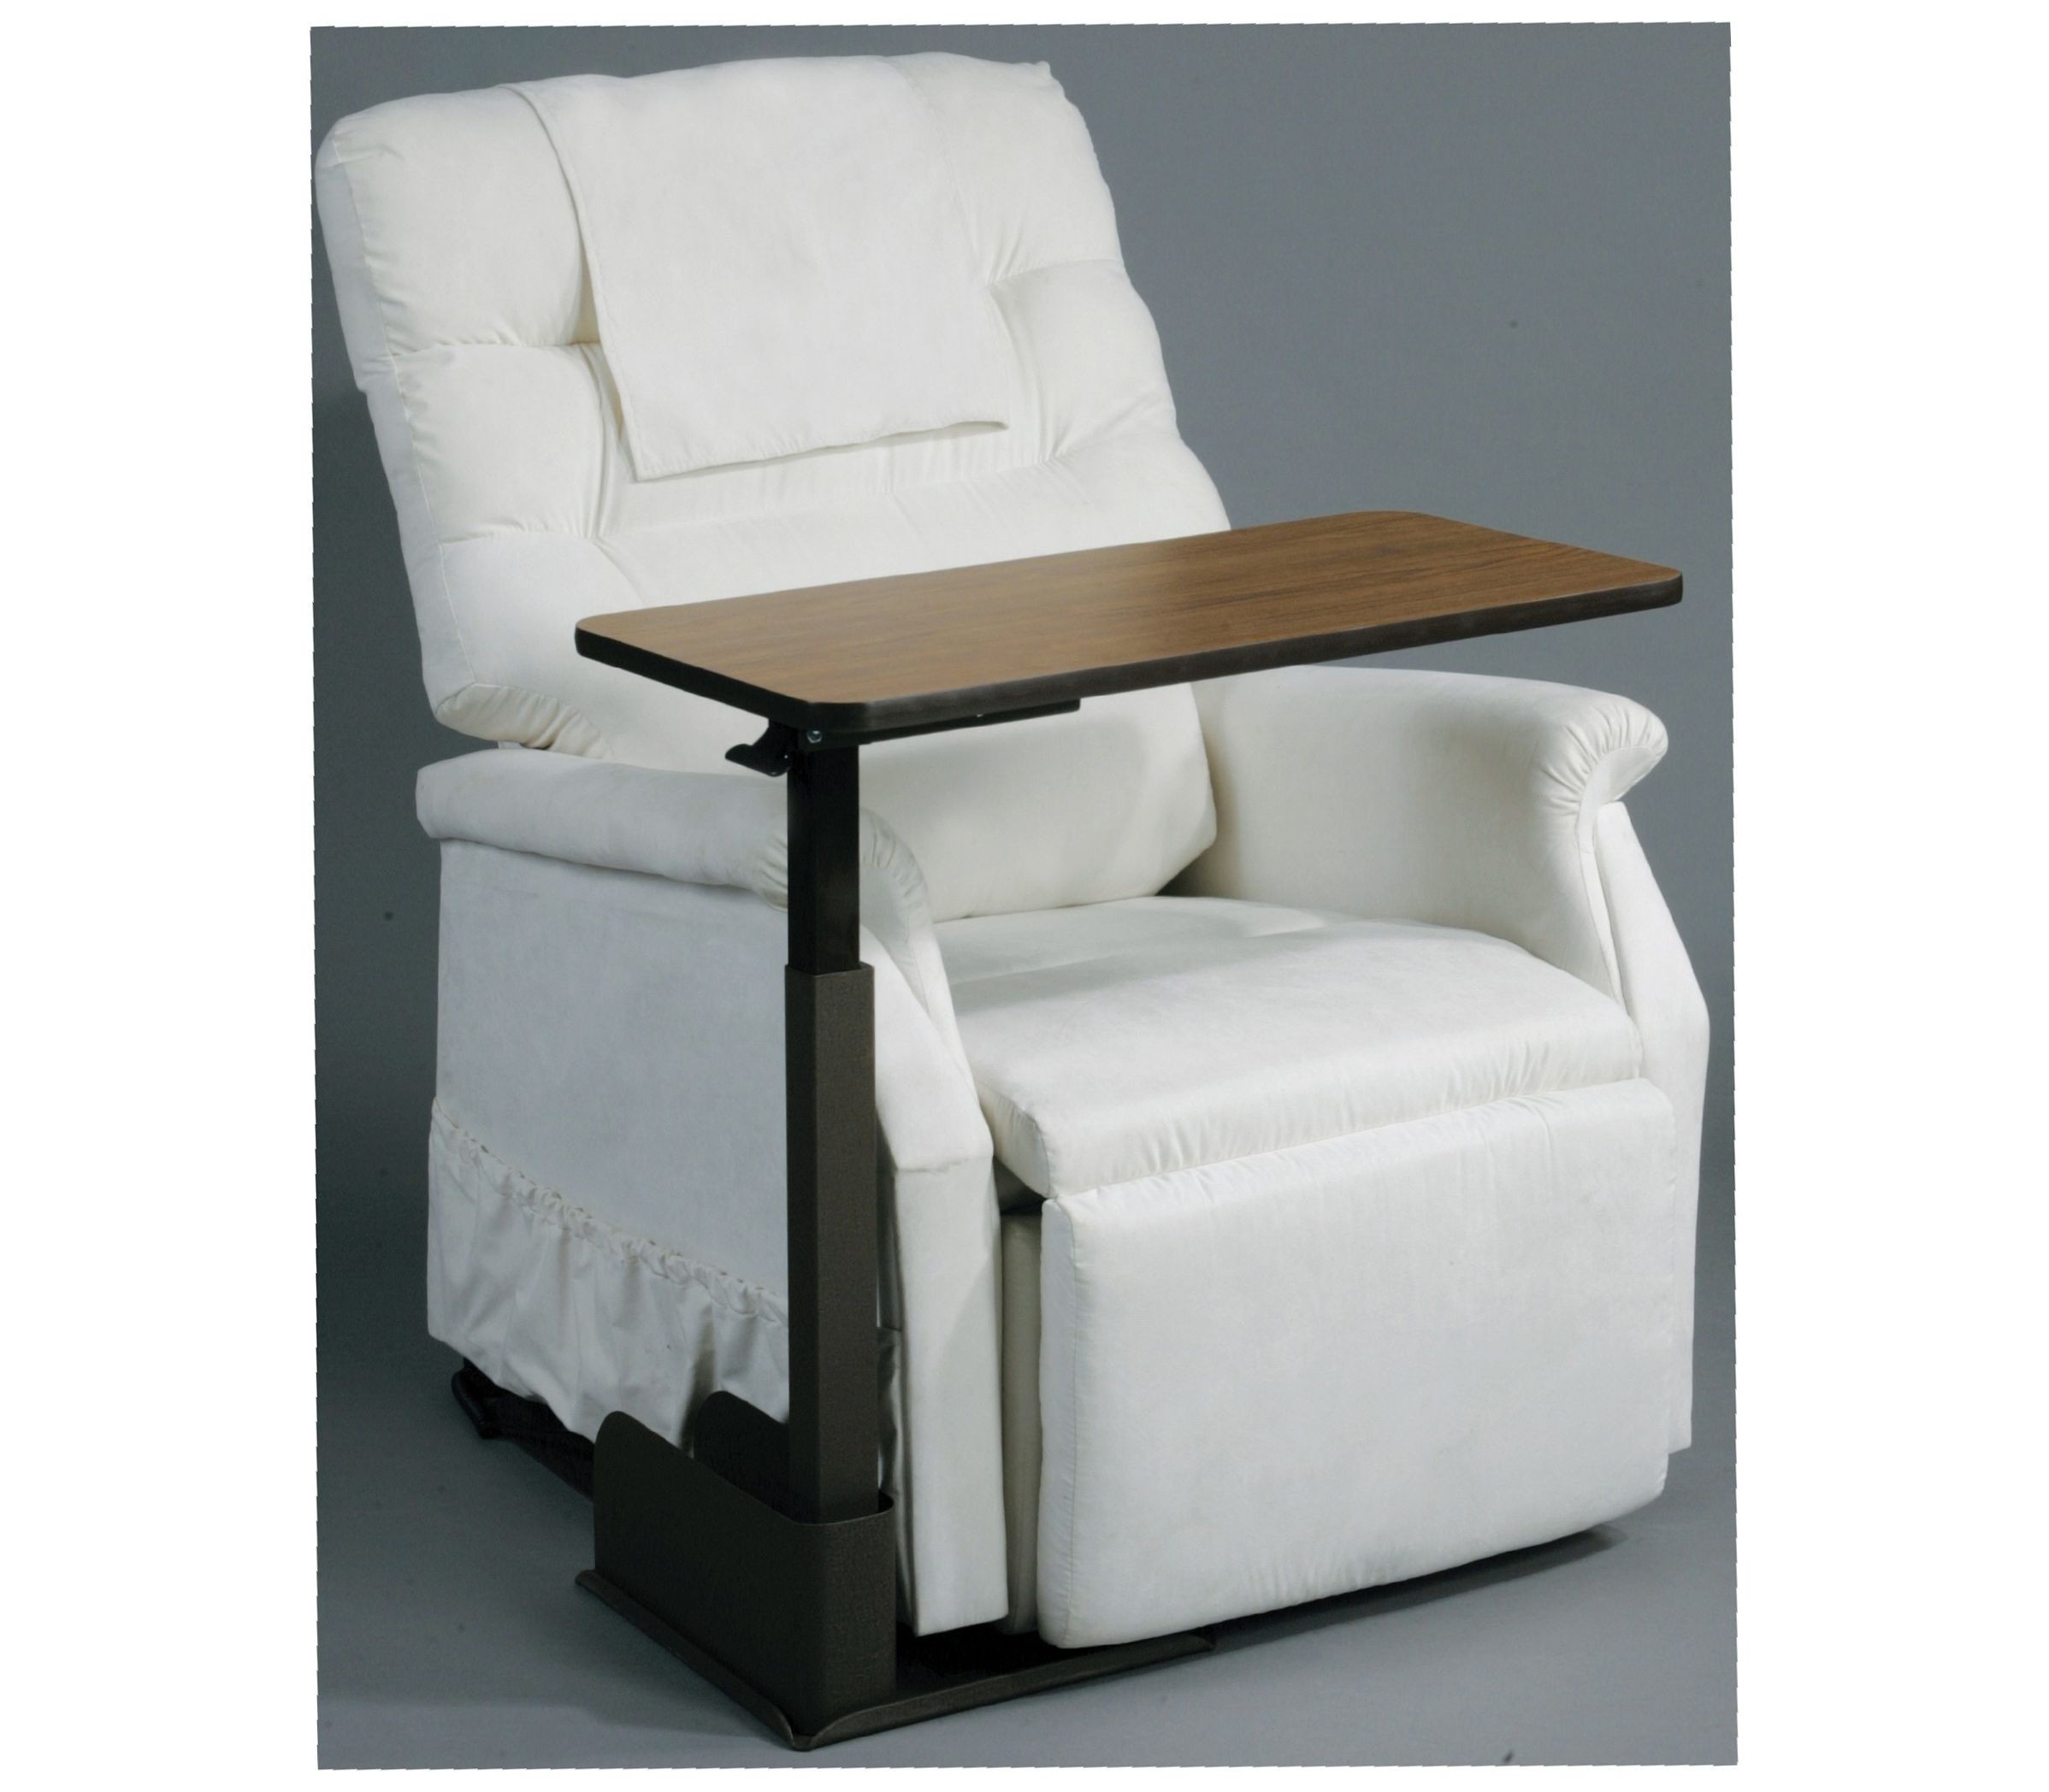 `Table (EZ) for Lift Chair Right Side